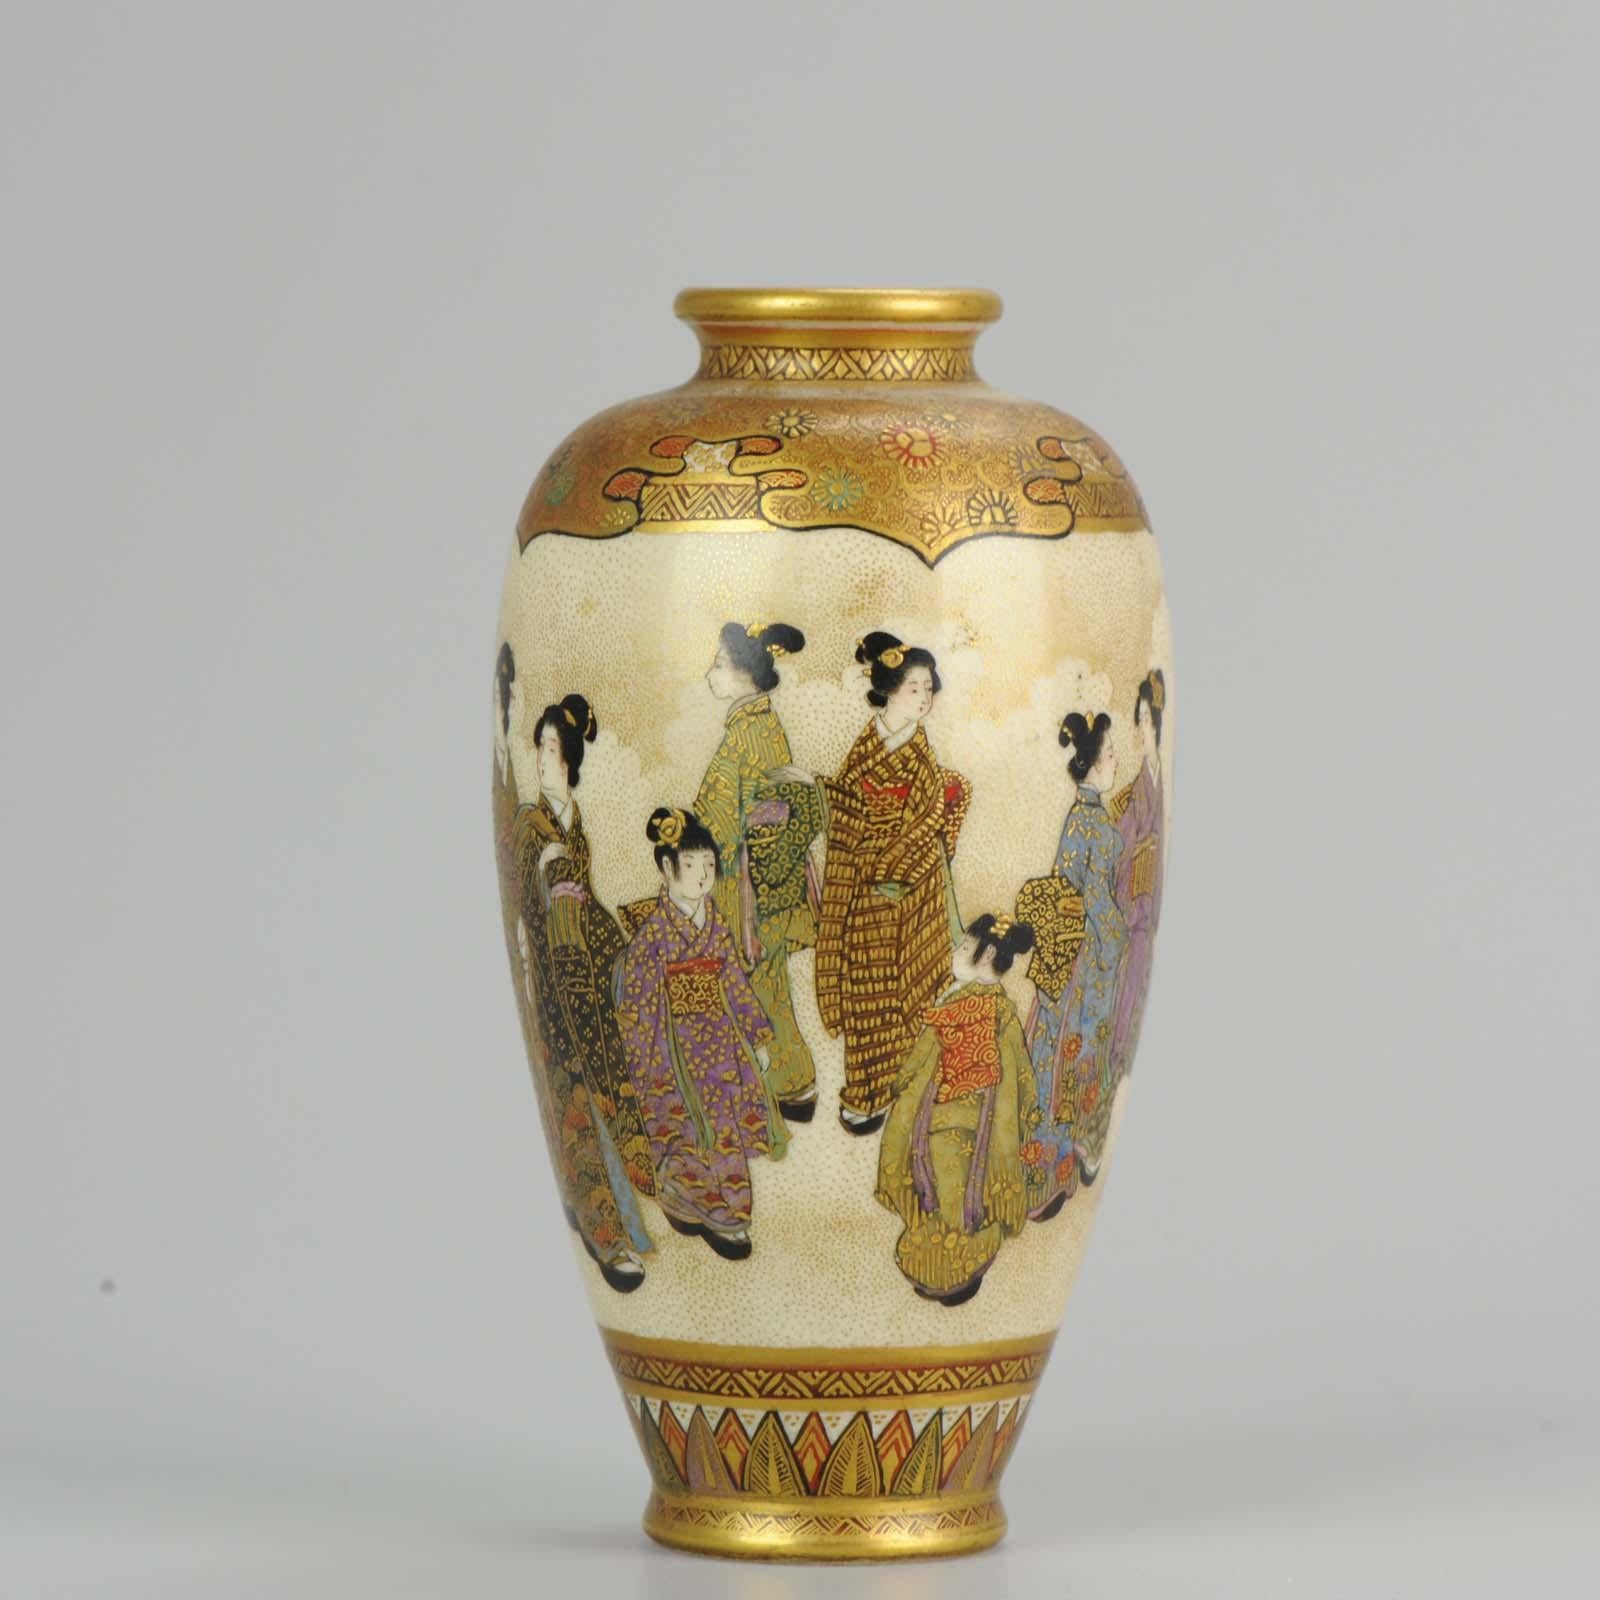 Fabulous Japanese vase. Interesting decoration of ladies
14-1-19-13-6
Condition:
Overall condition very good. Size: 120 mm
Period:
Meiji Periode (1867-1912).